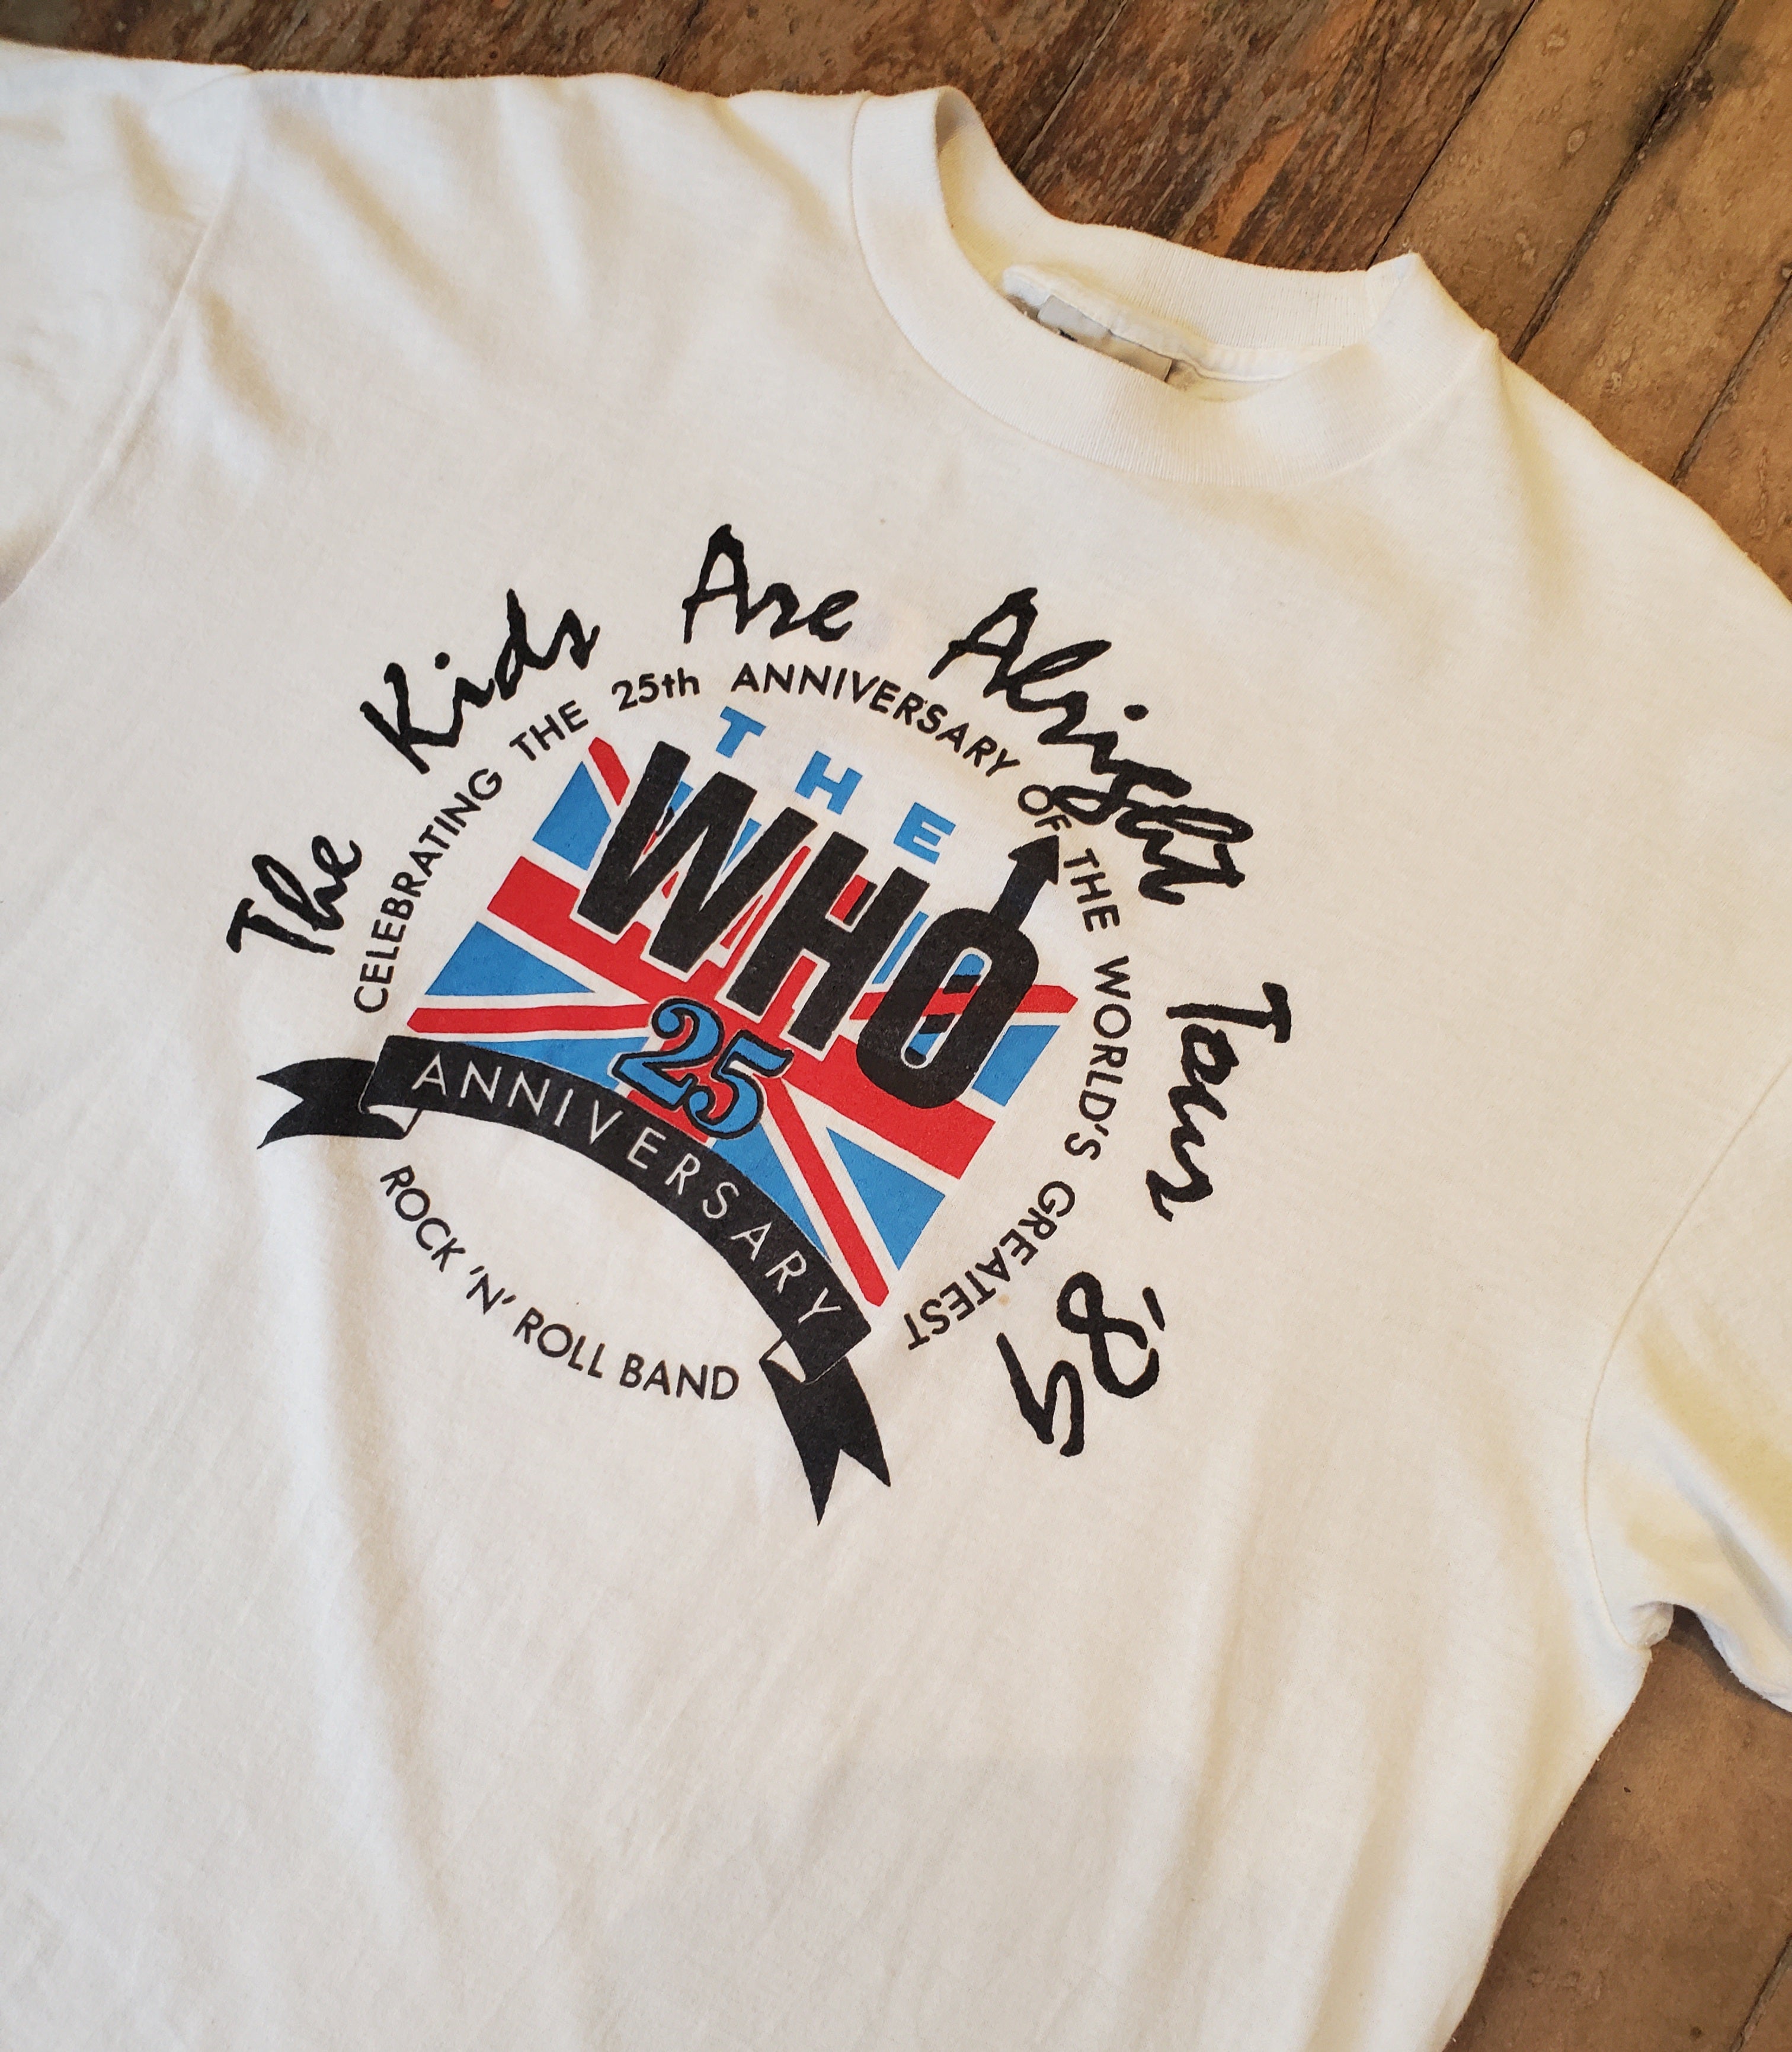 1989 The Who Concert T Shirt